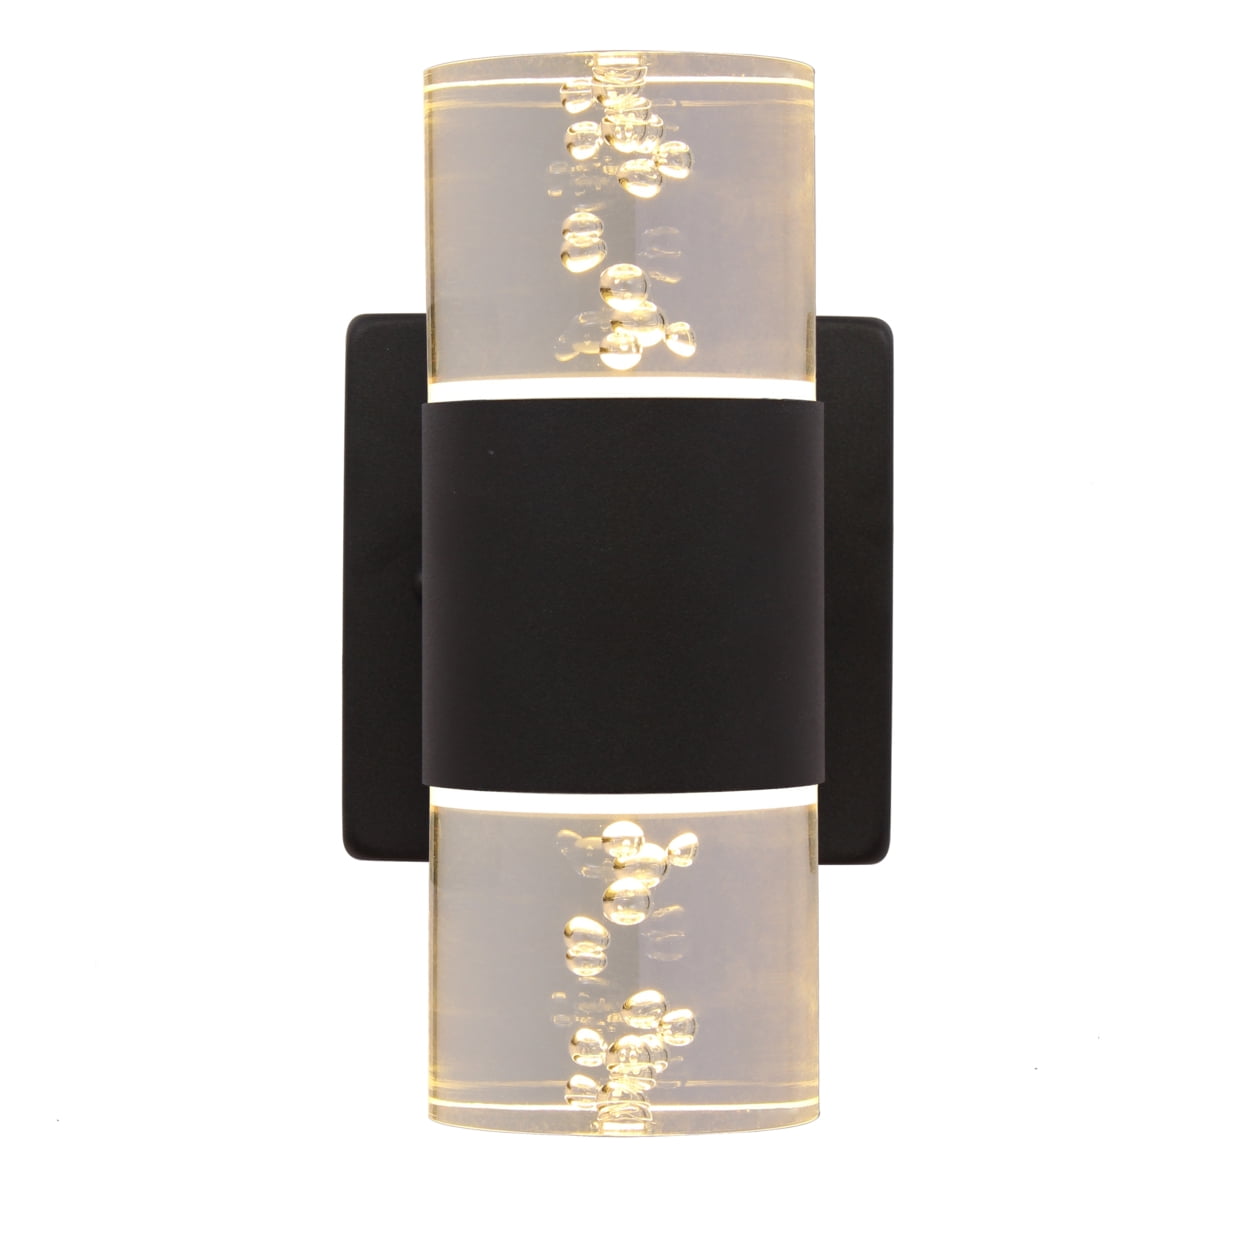 Ch7q032bk10-lw2 Ambert 2 Light Led Indoor & Outdoor Wall Sconce 3000k, Warm White - 10 In.